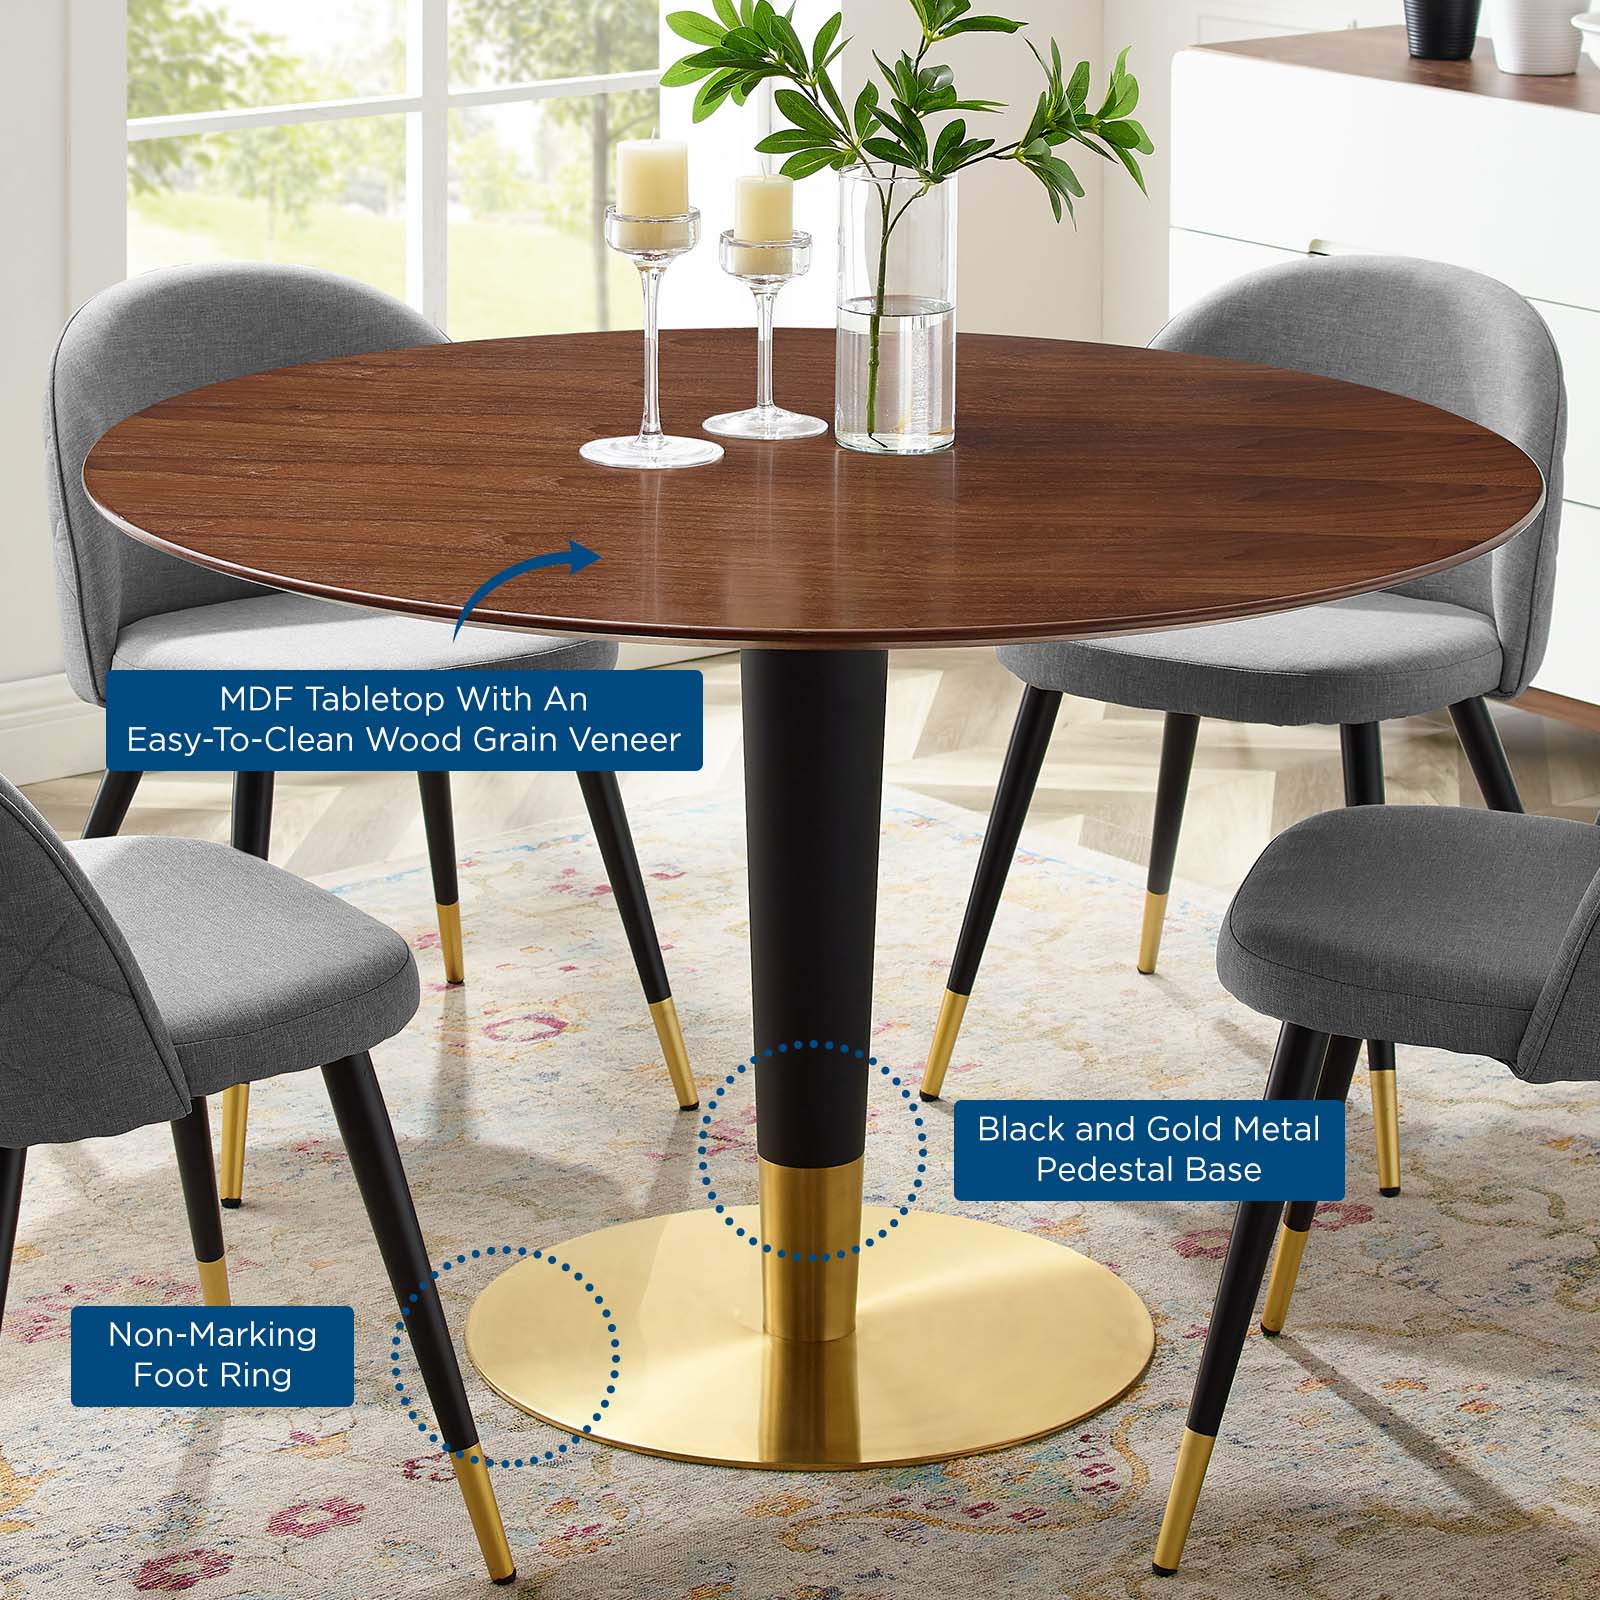 Zinque 47" Dining Table - East Shore Modern Home Furnishings